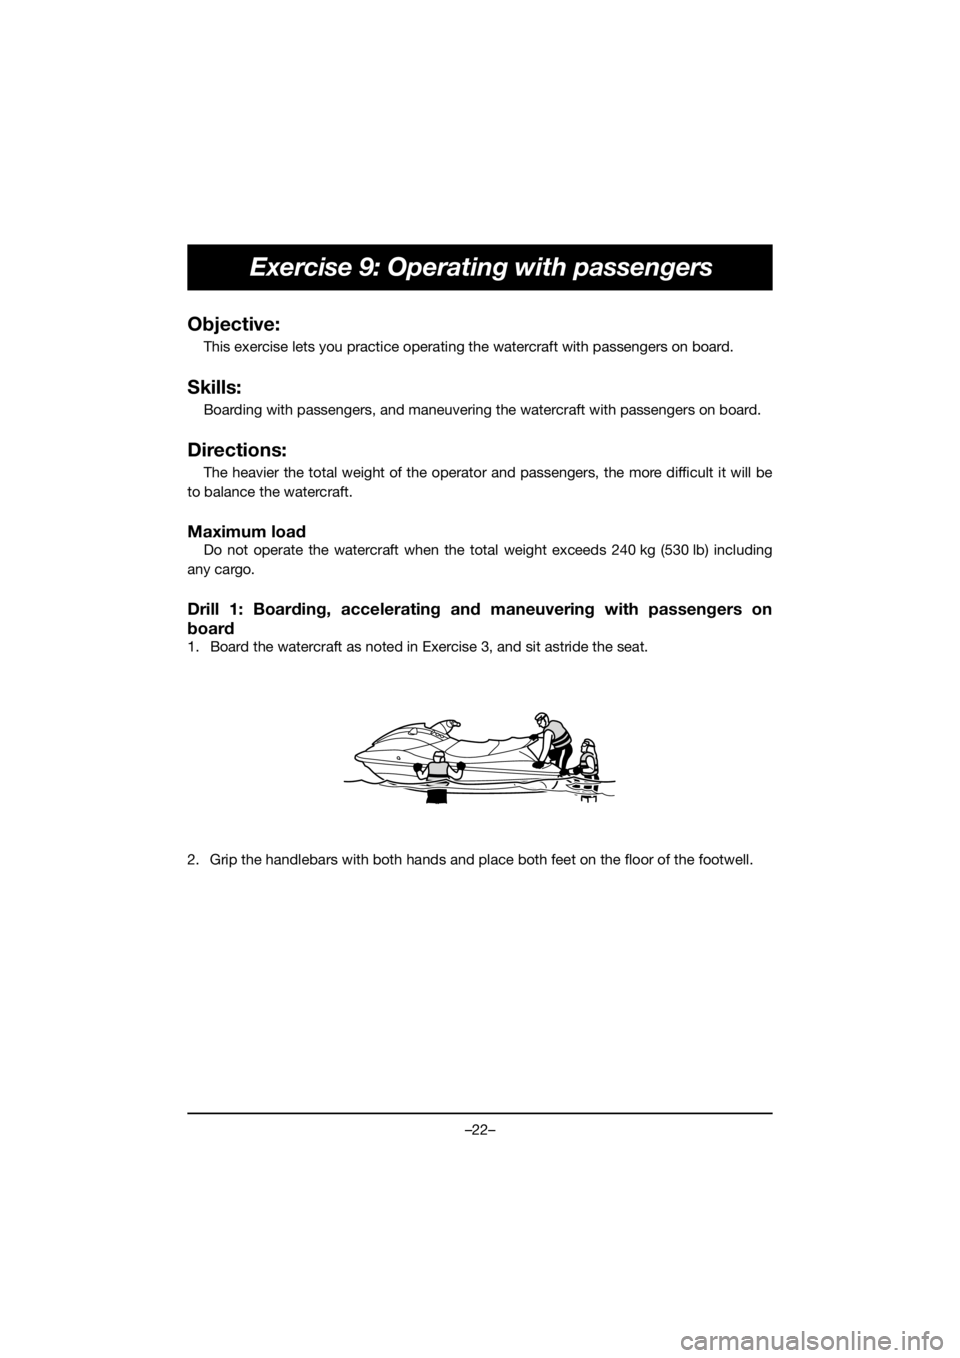 YAMAHA VX DELUXE 2019  Manual de utilização (in Portuguese) –22–
Exercise 9: Operating with passengers
Objective:
This exercise lets you practice operating the watercraft with passengers on board.
Skills:
Boarding with passengers, and maneuvering the water